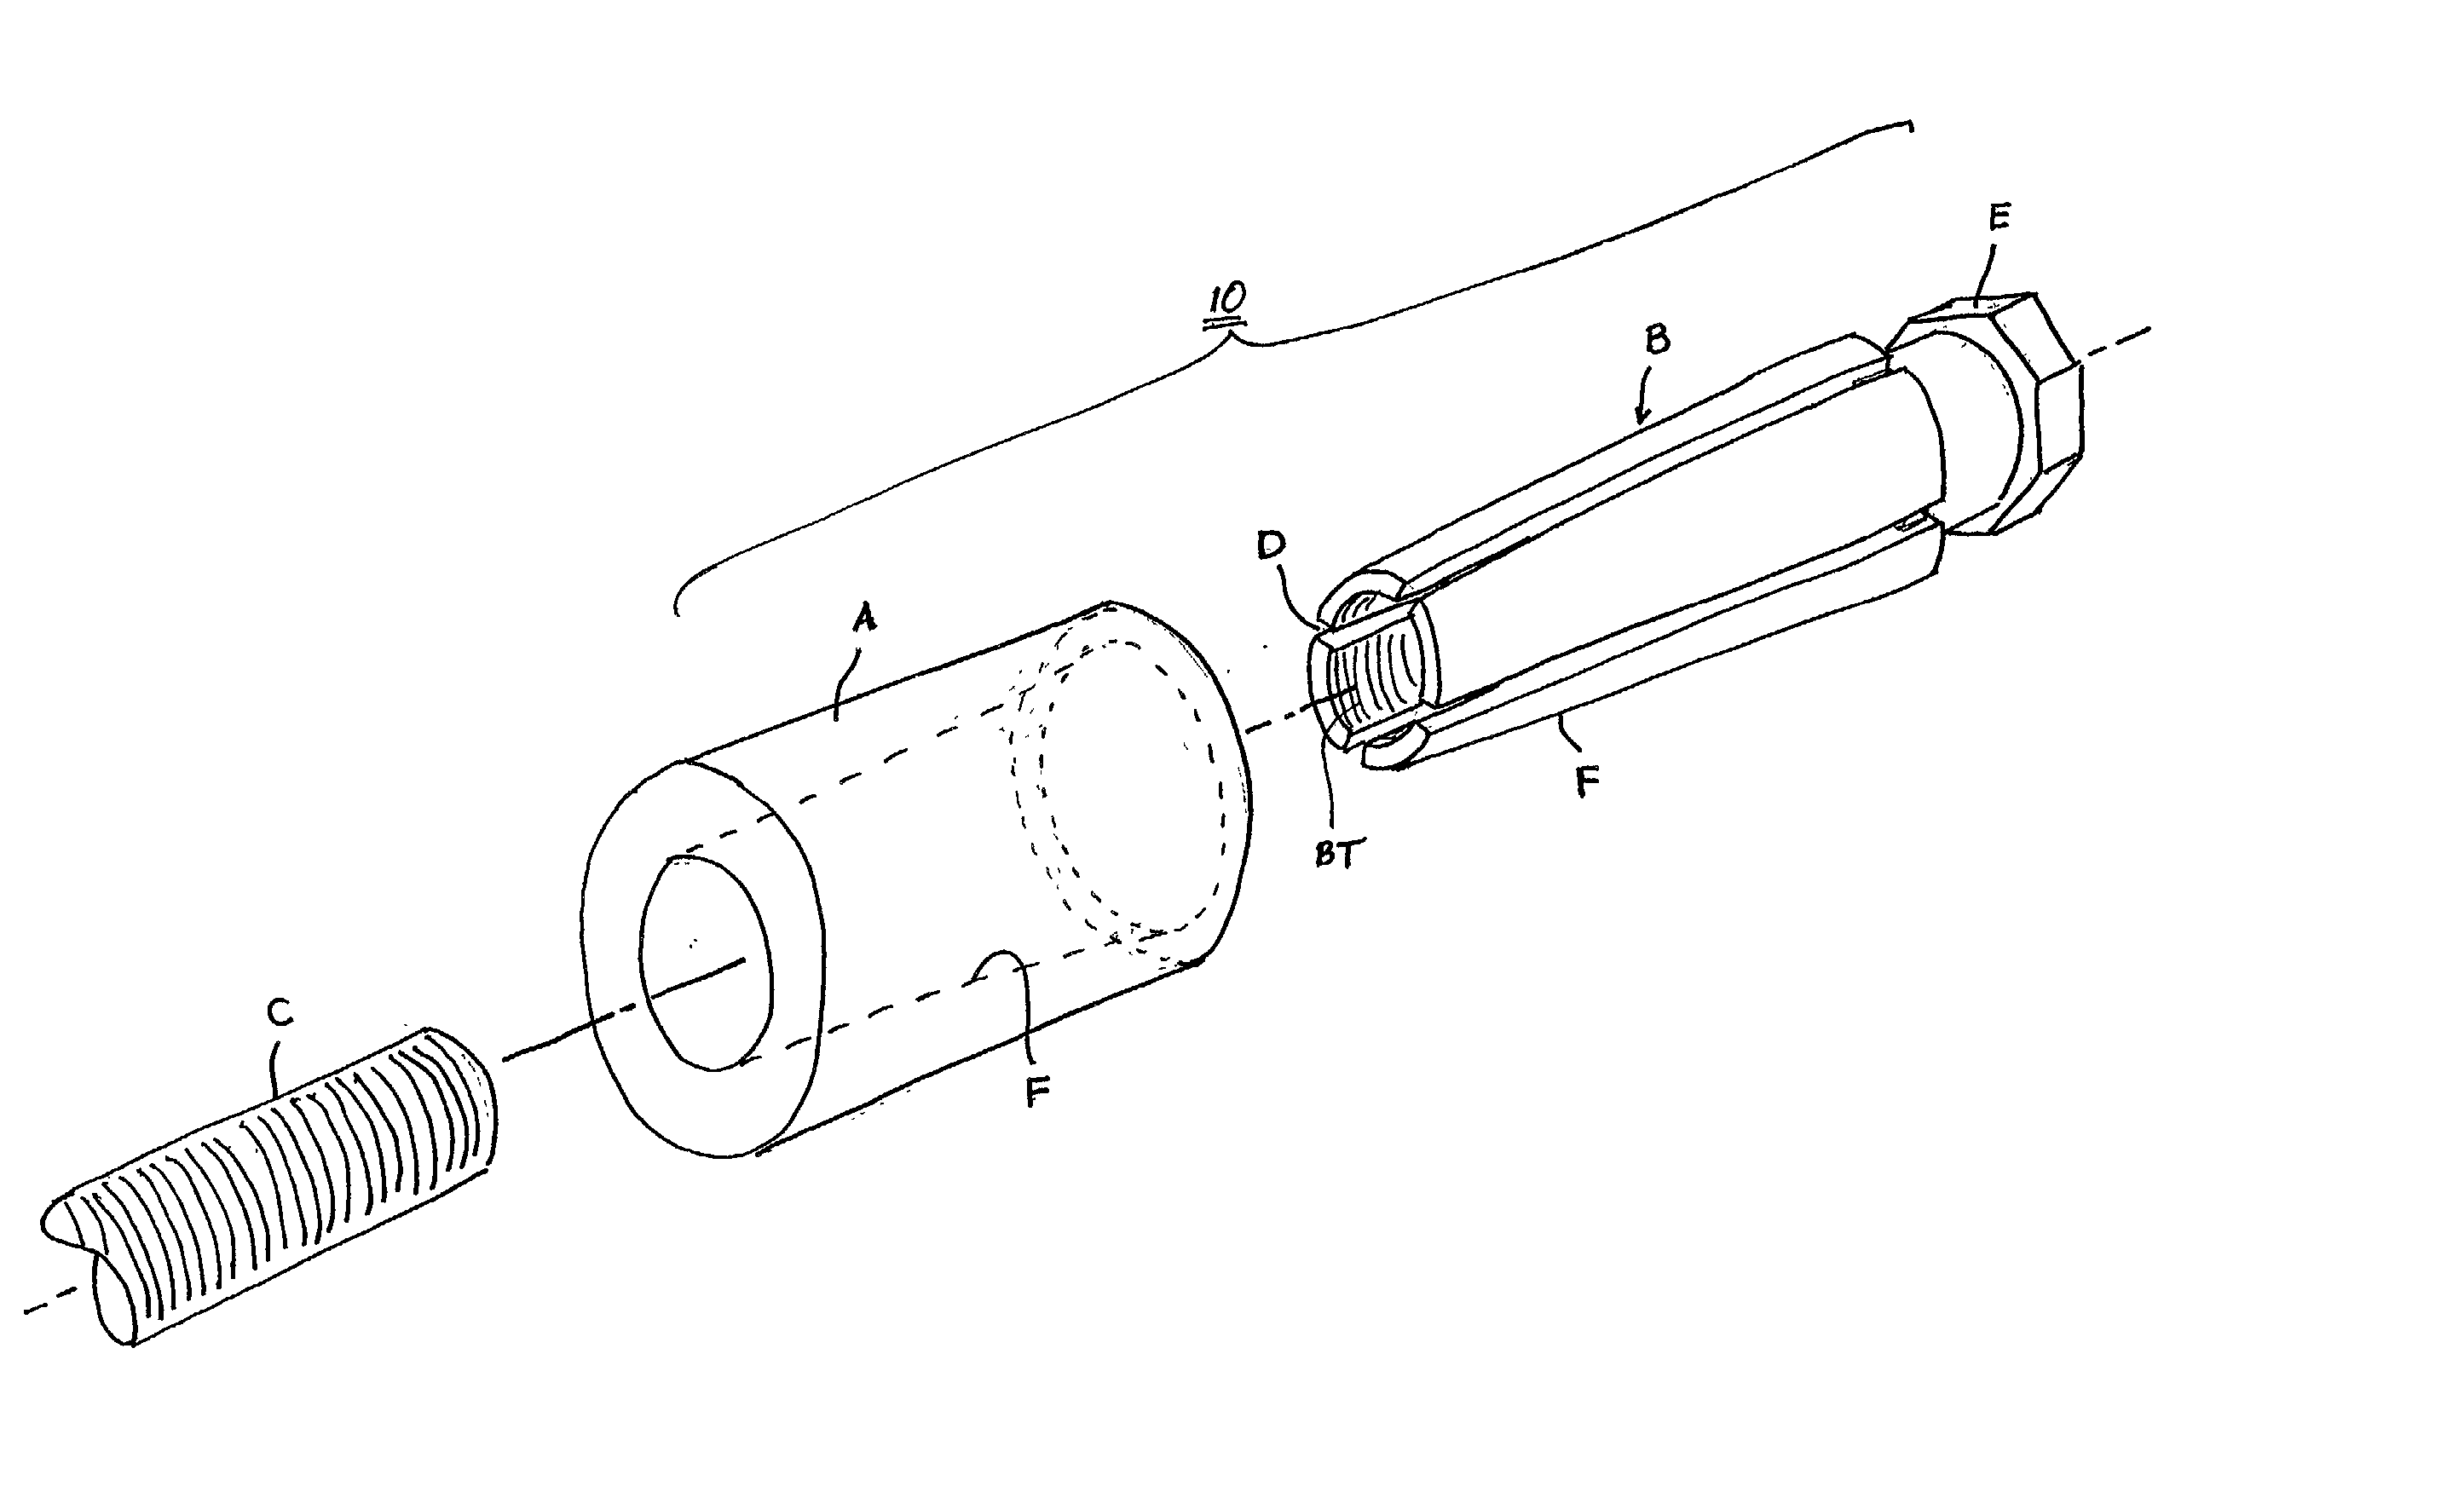 Threaded compression-enhanced fastening device for use with threaded rods